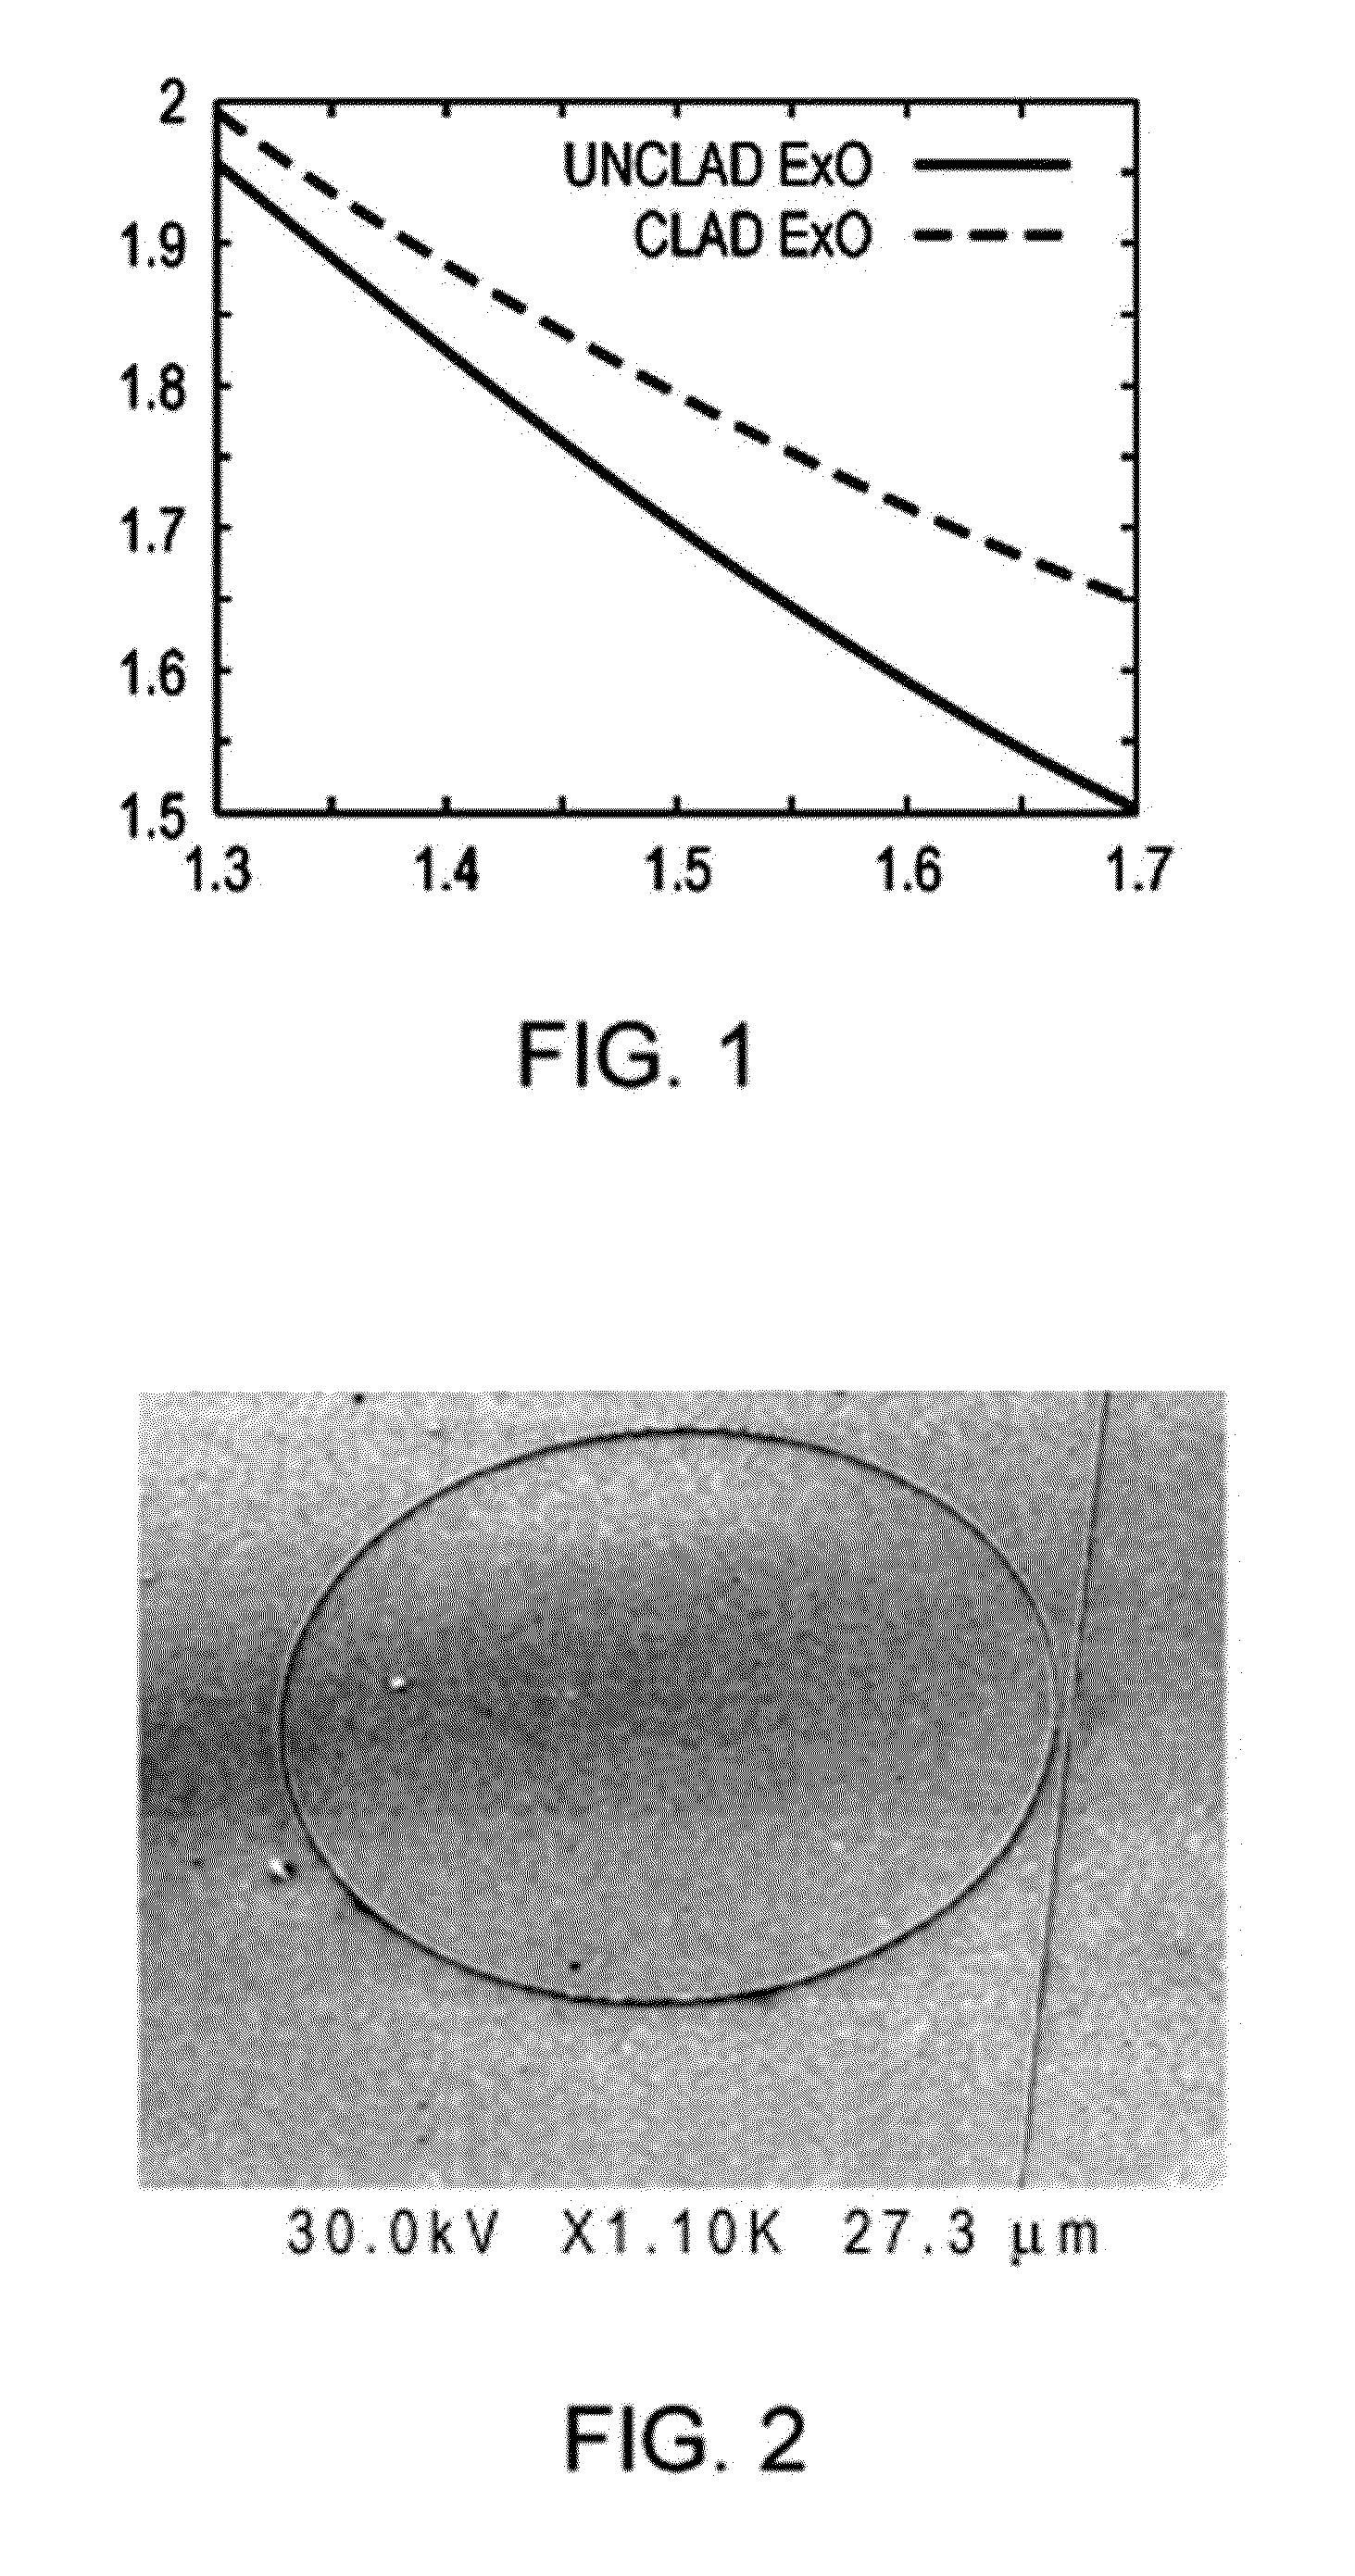 Beam generation and steering with integrated optical circuits for light detection and ranging